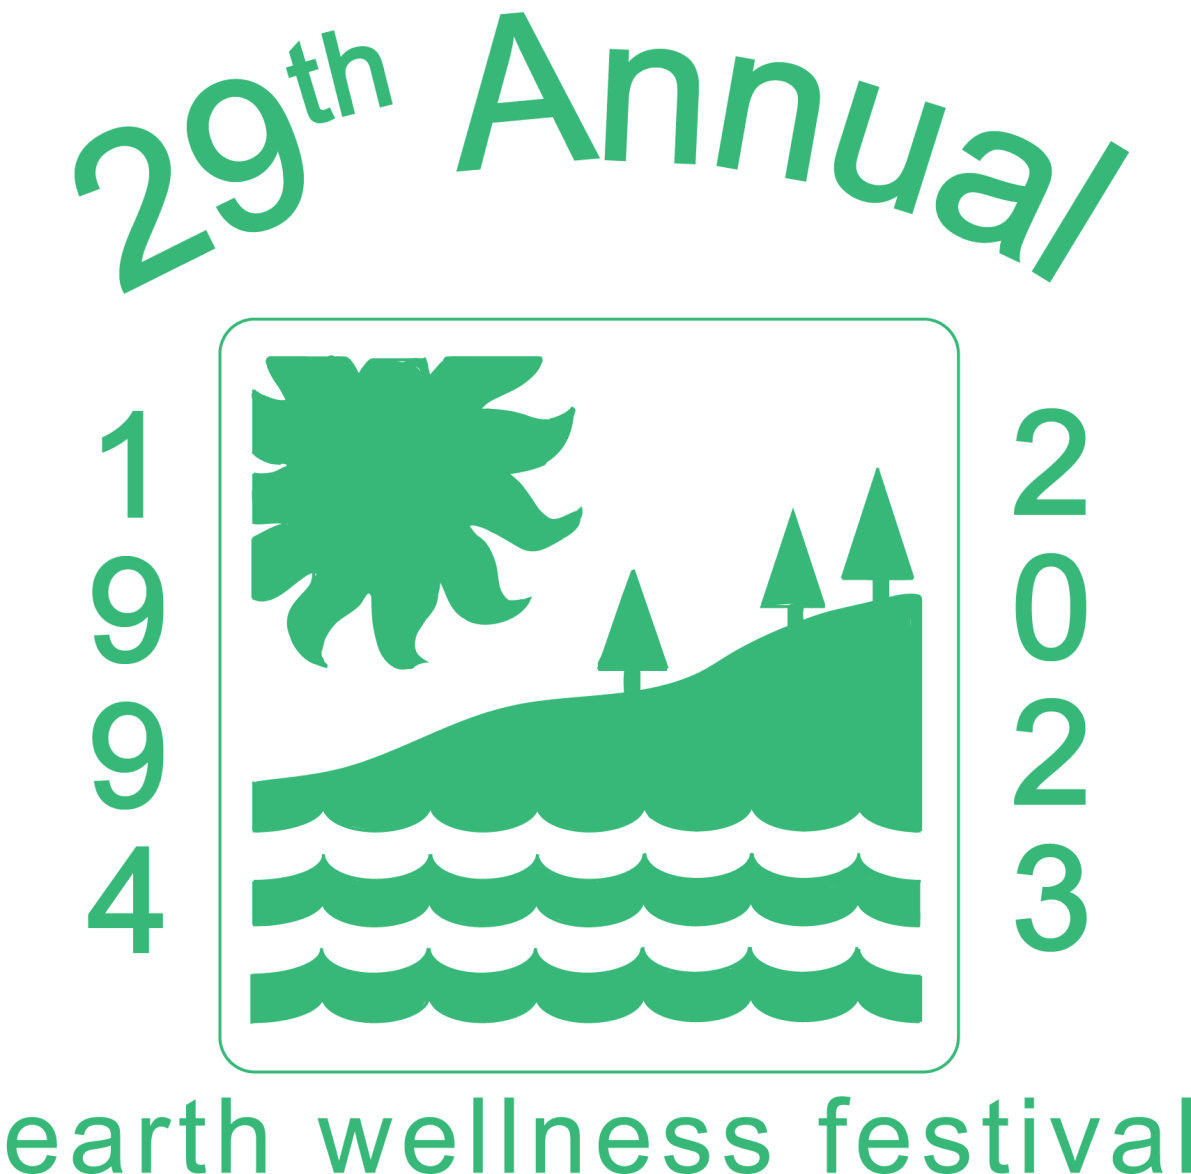 Welcome to the 2023 earth wellness festival!